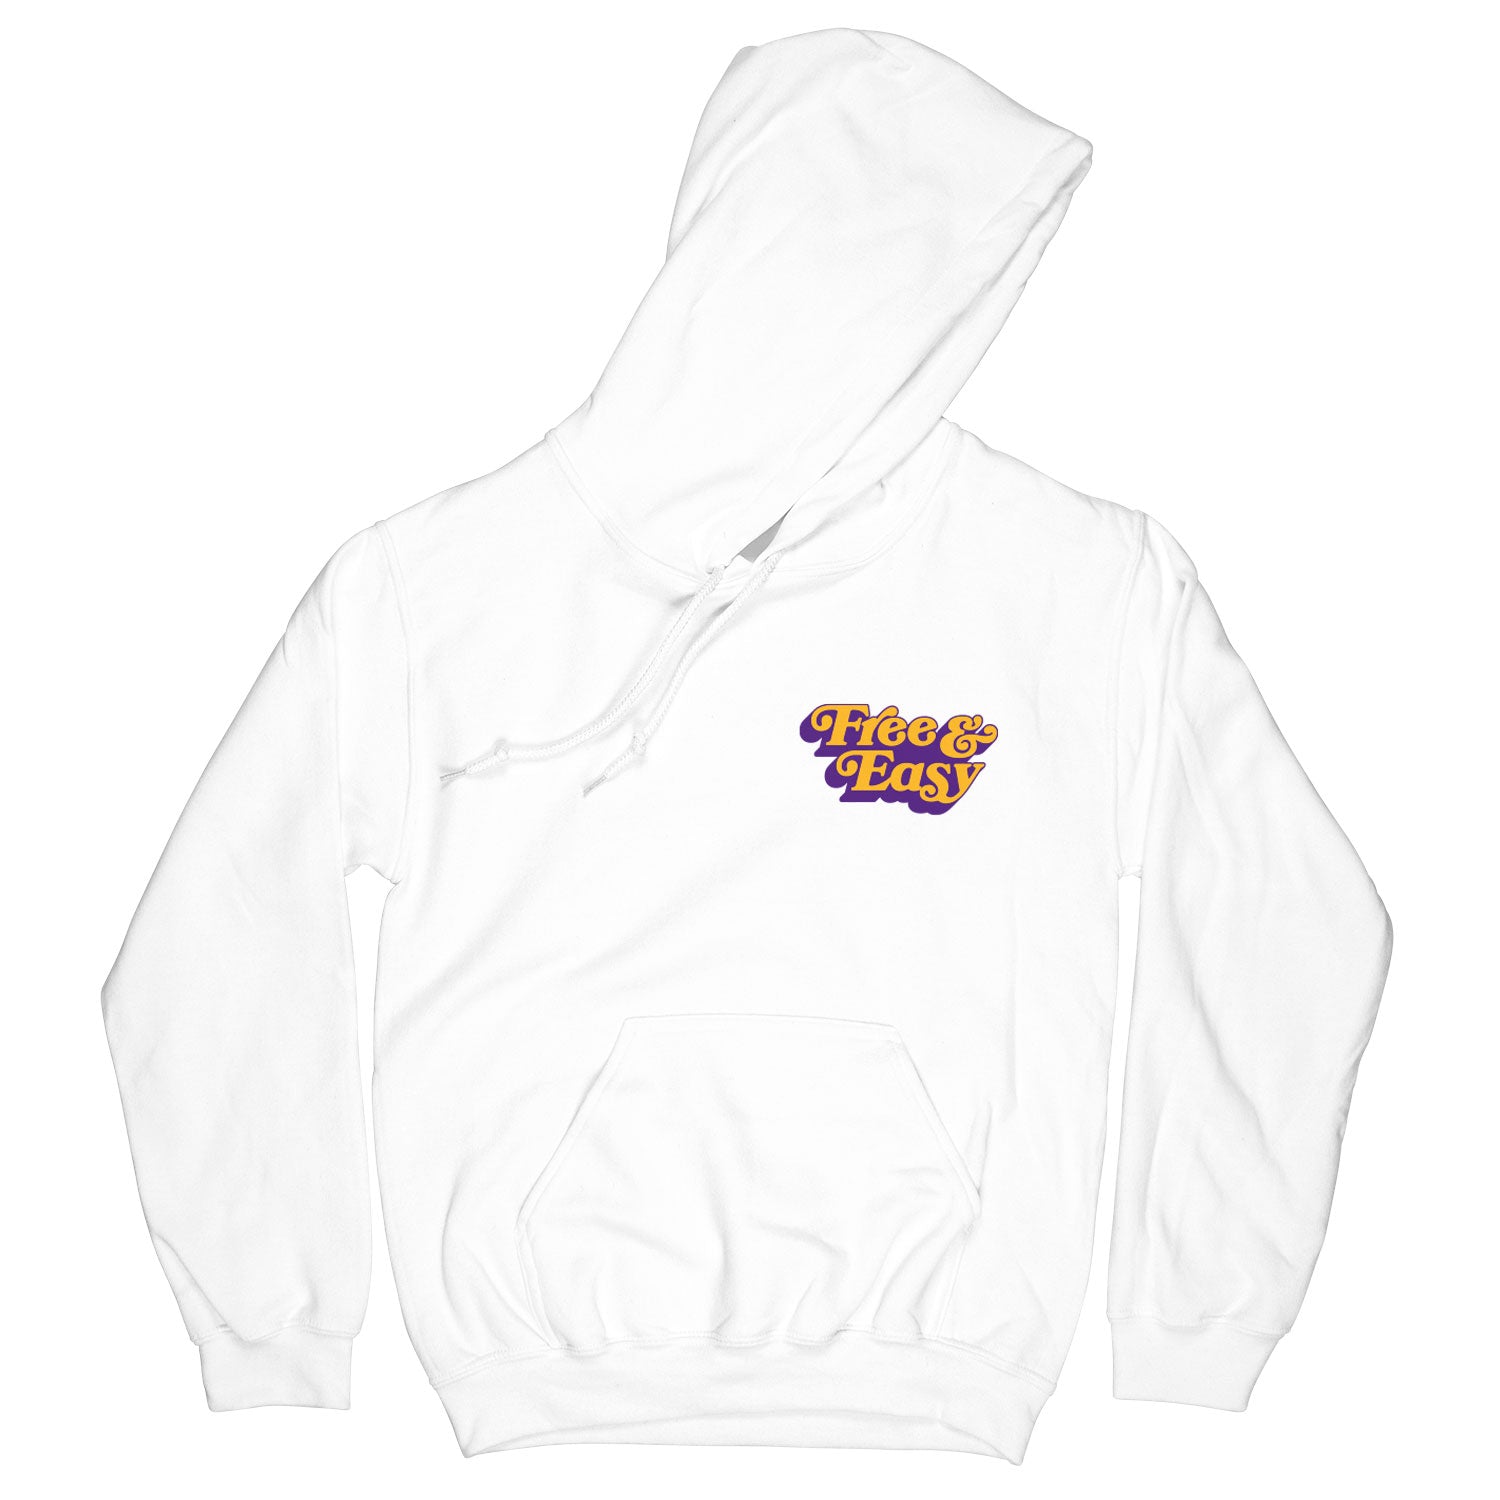 Don't Trip OG Hoodie in white with yellow and purple Free & Easy logo design on front left side on a white background - Free & Easy